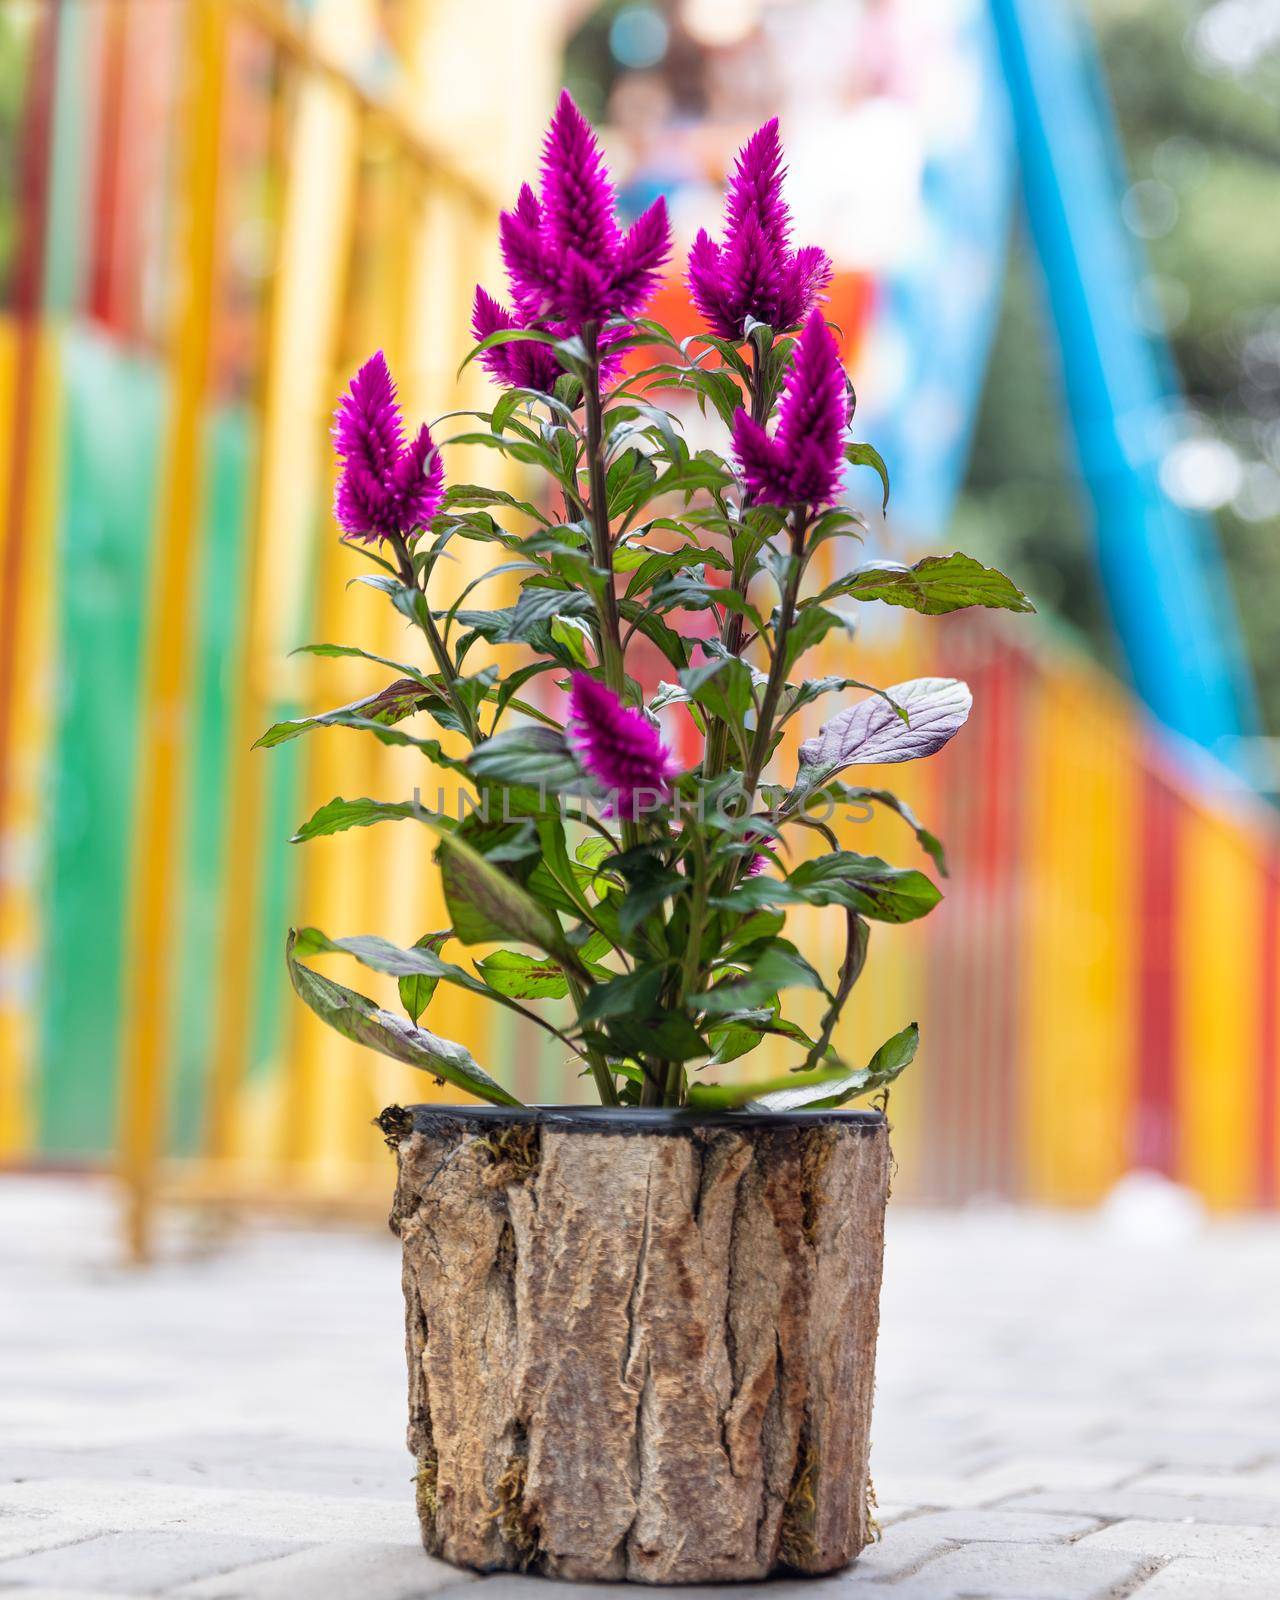 Cock's comb, Celosia in the wooden pot by ferhad